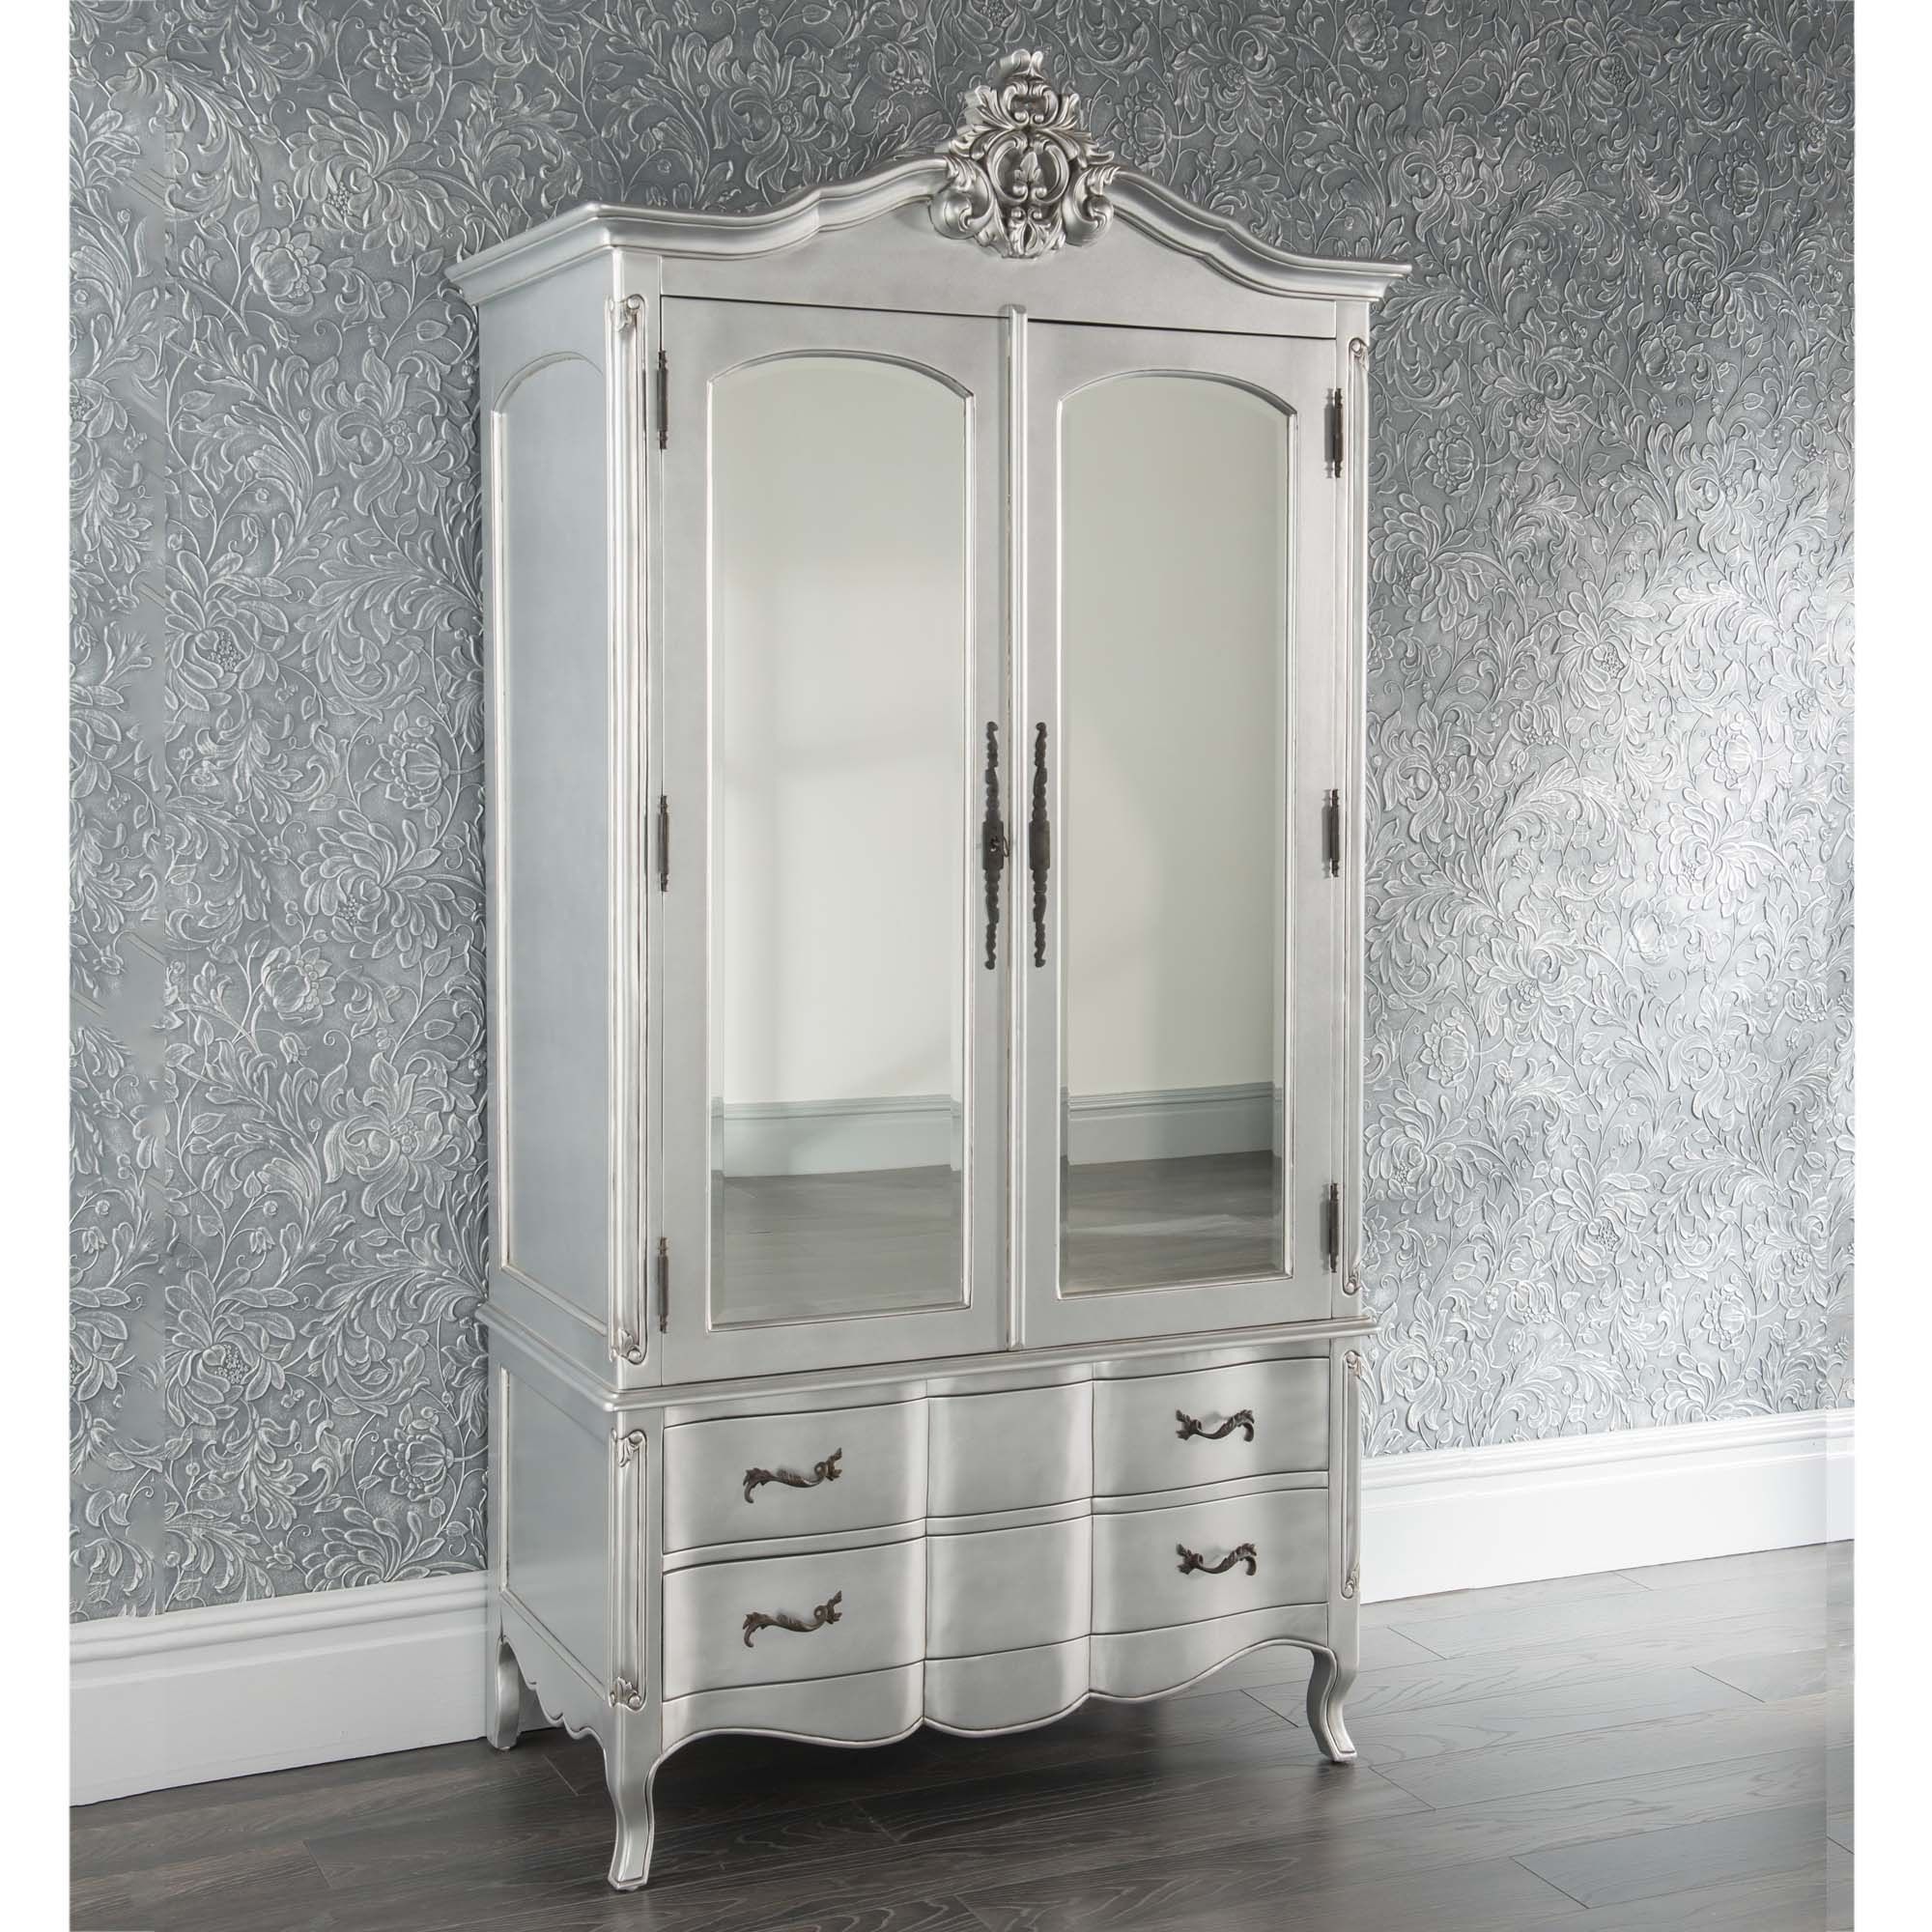 Shabby Chic Throughout Newest Silver Wardrobes (View 2 of 15)